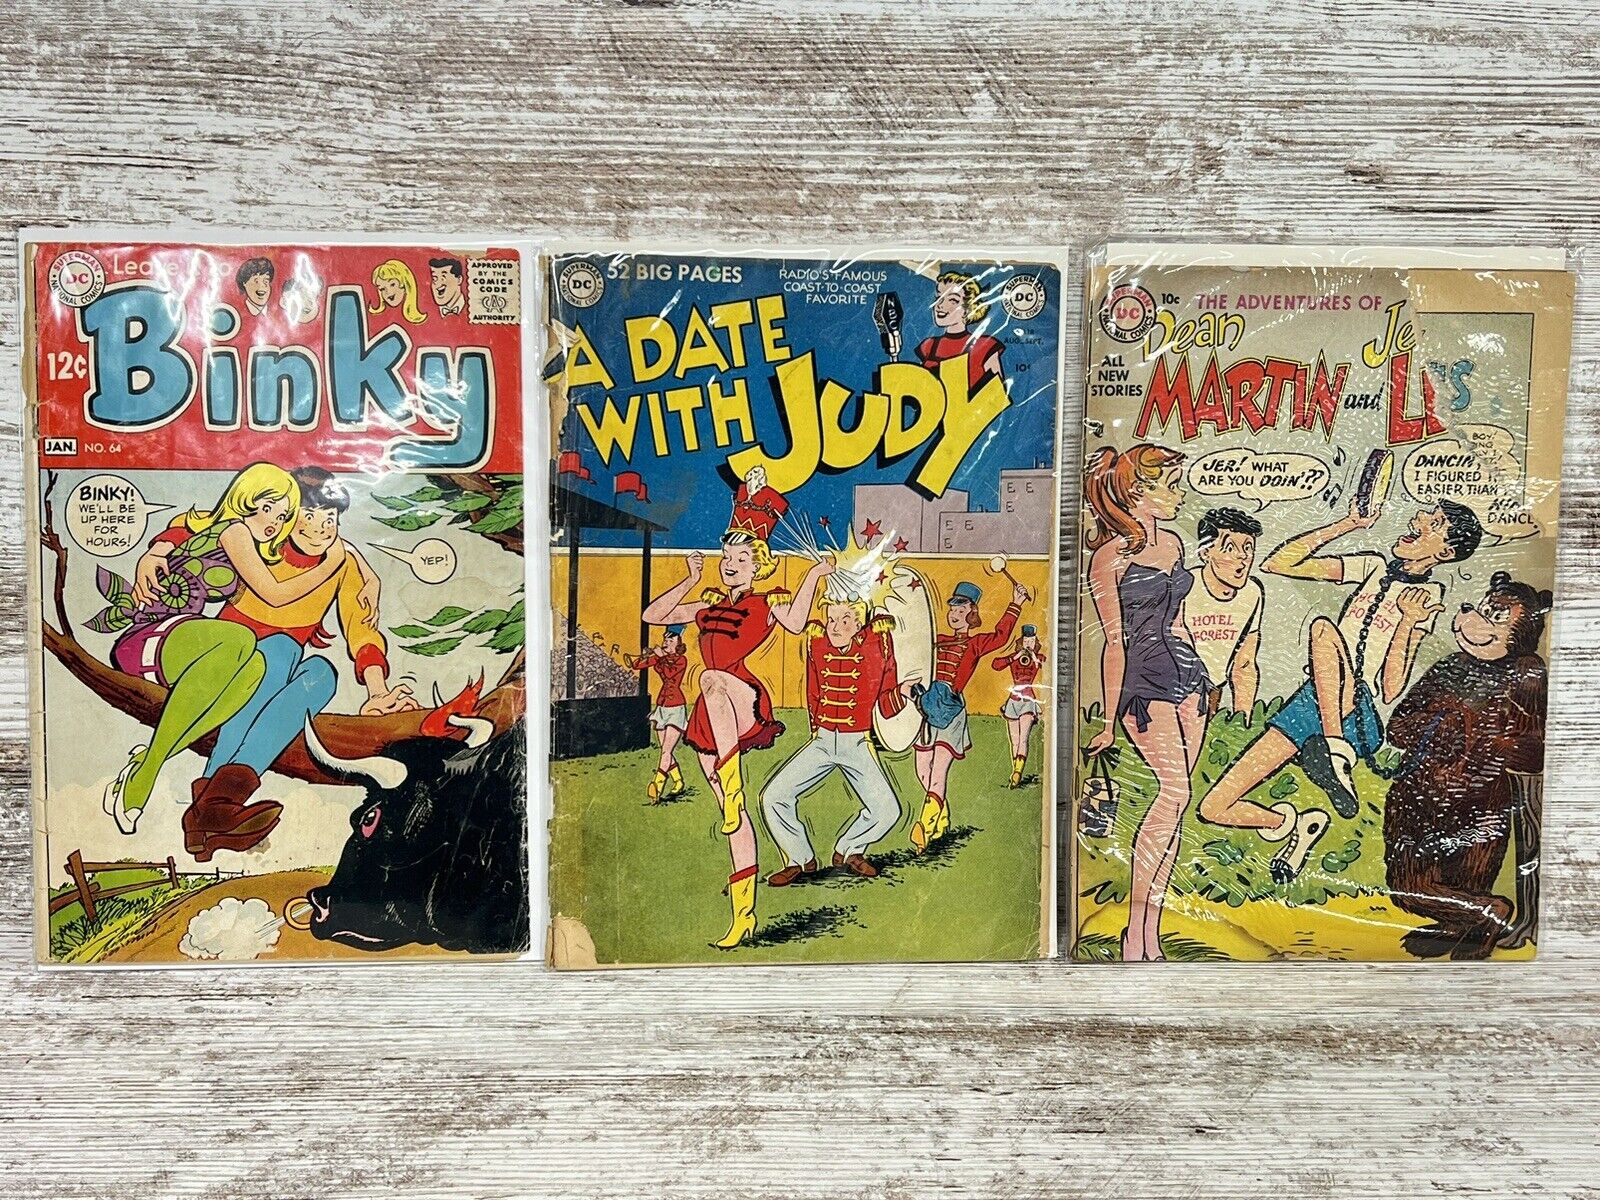 DC Comics lot of 3- Binky 64 A Date with Judy 18 Dean Martin & Jerry Lewis 26